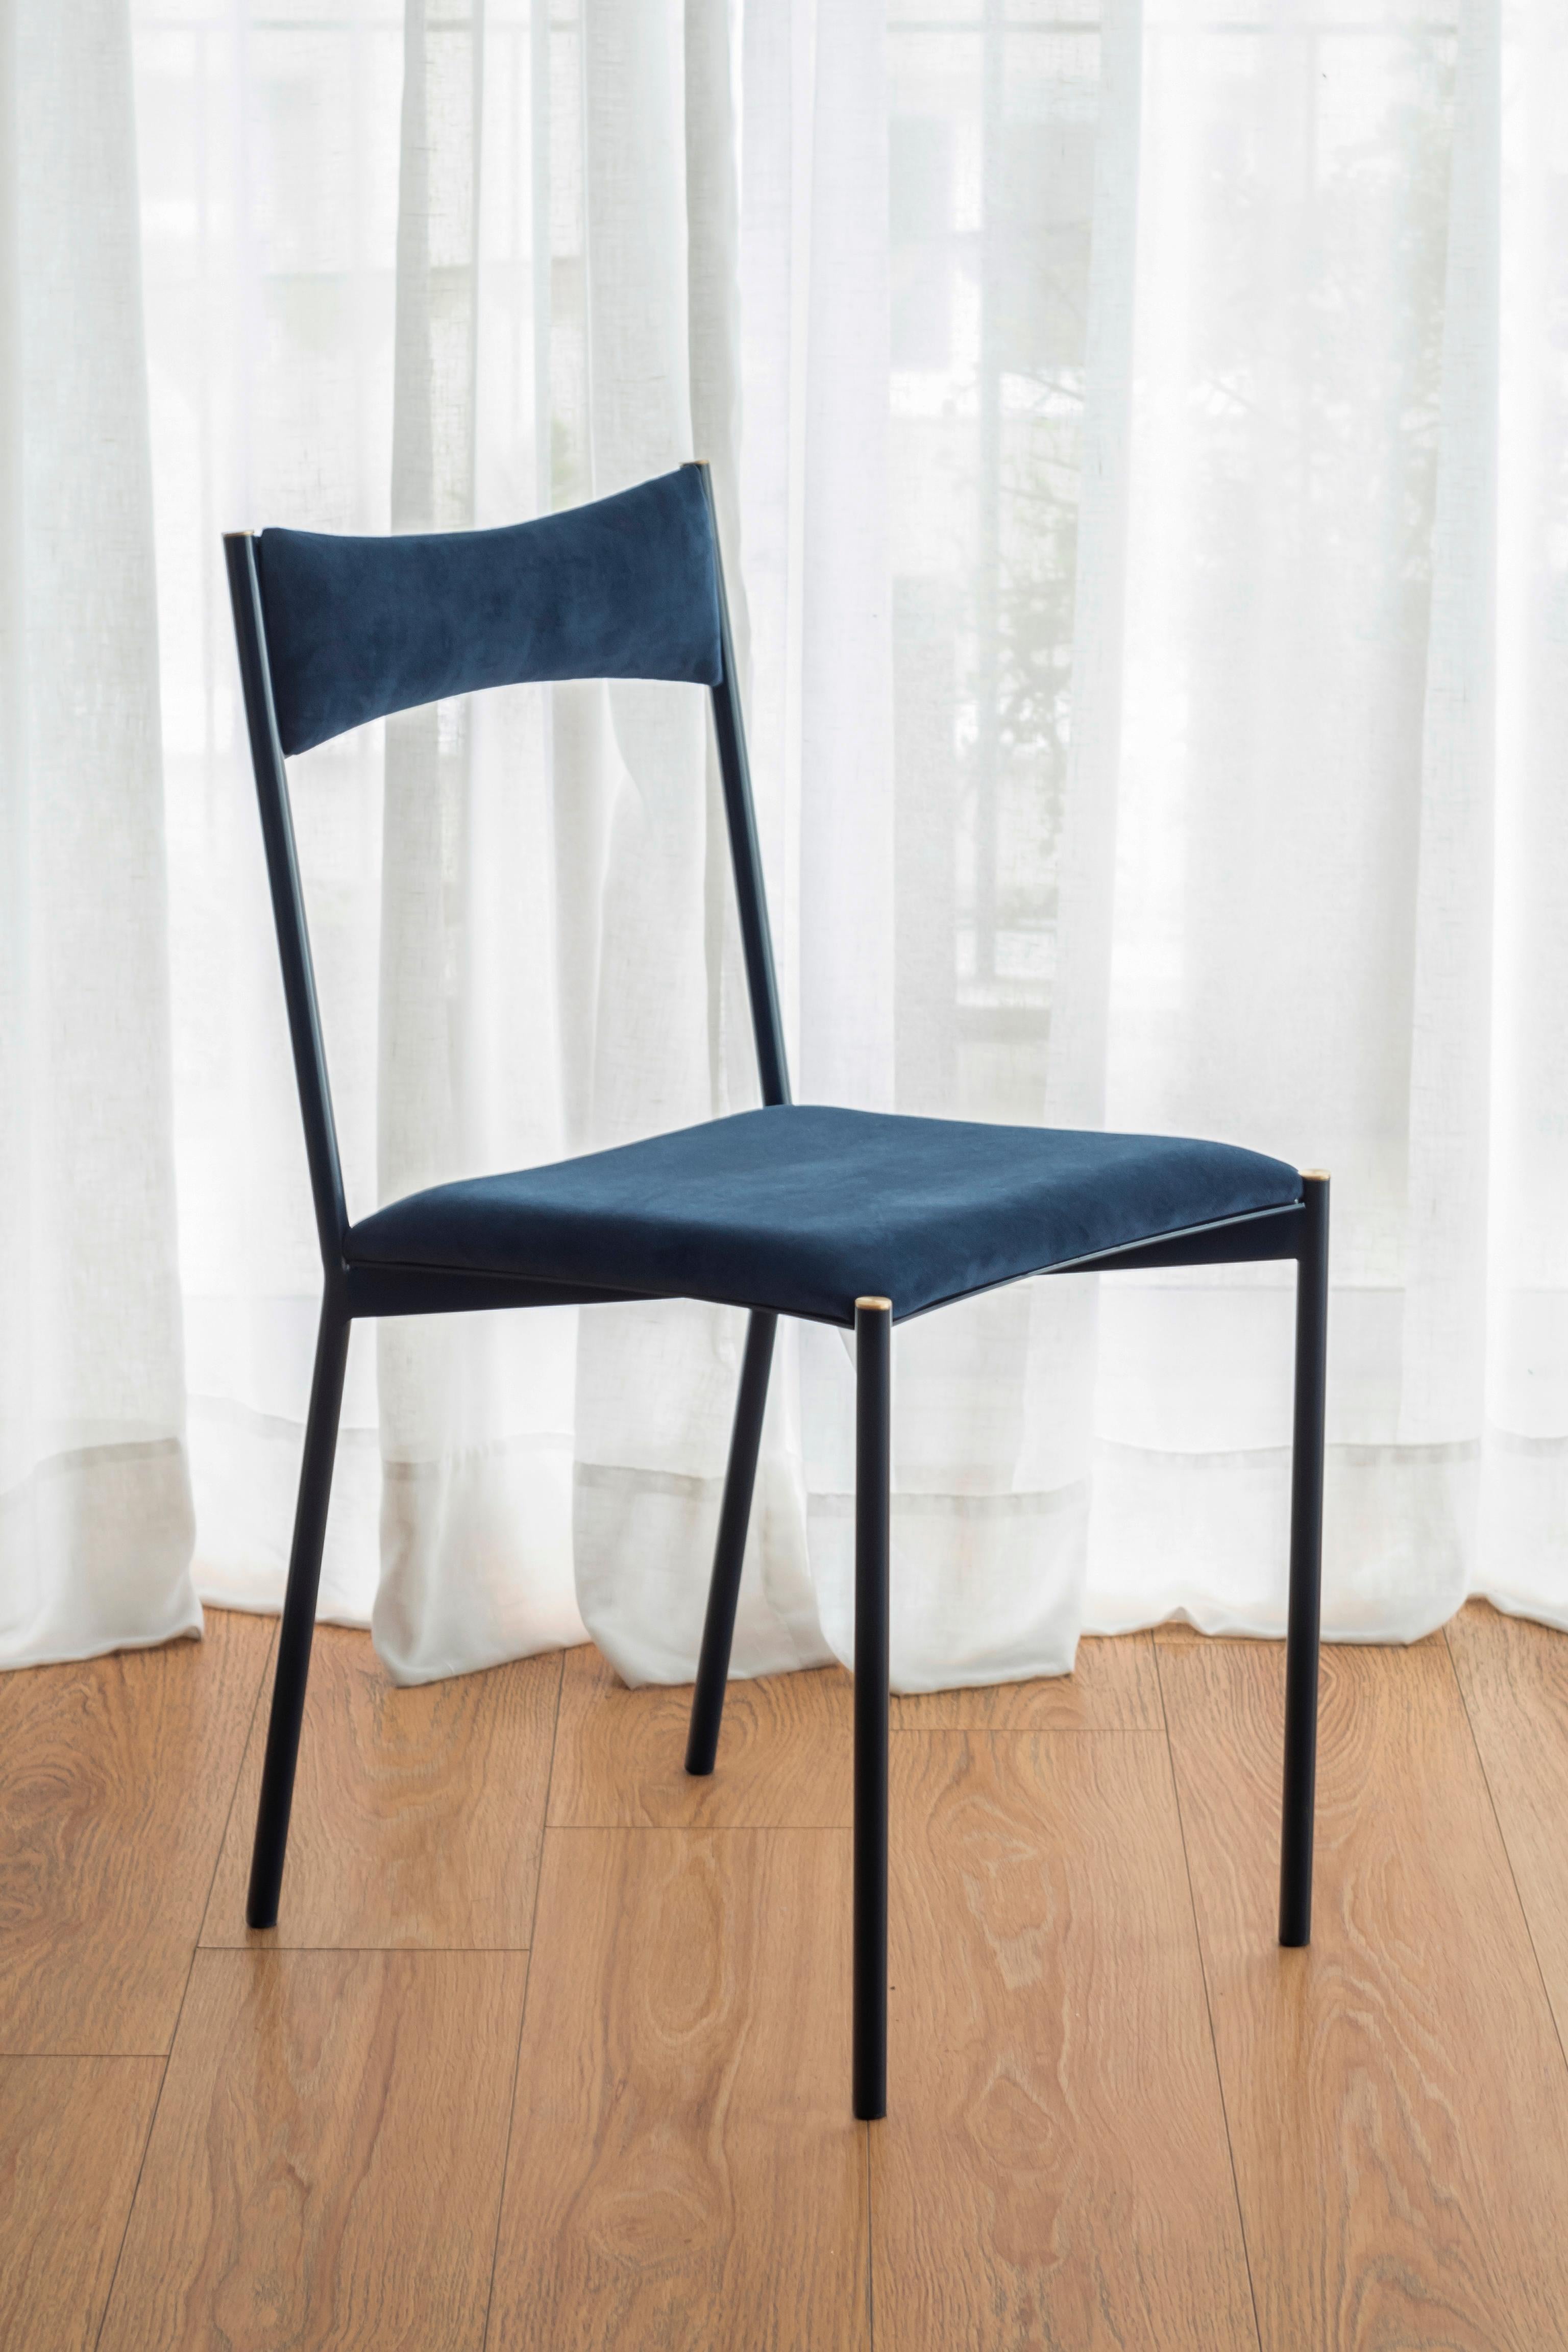 Tensa chair, dark blue by Ries
Dimensions: W 40 x D 49.5 x H 82 cm 
Materials: Round steel tube, laser cut metal sheet, high density foam, velvet upholstery, aluminum/bronze caps
Matte powder coated painting (Finishings)

Also available: Black,